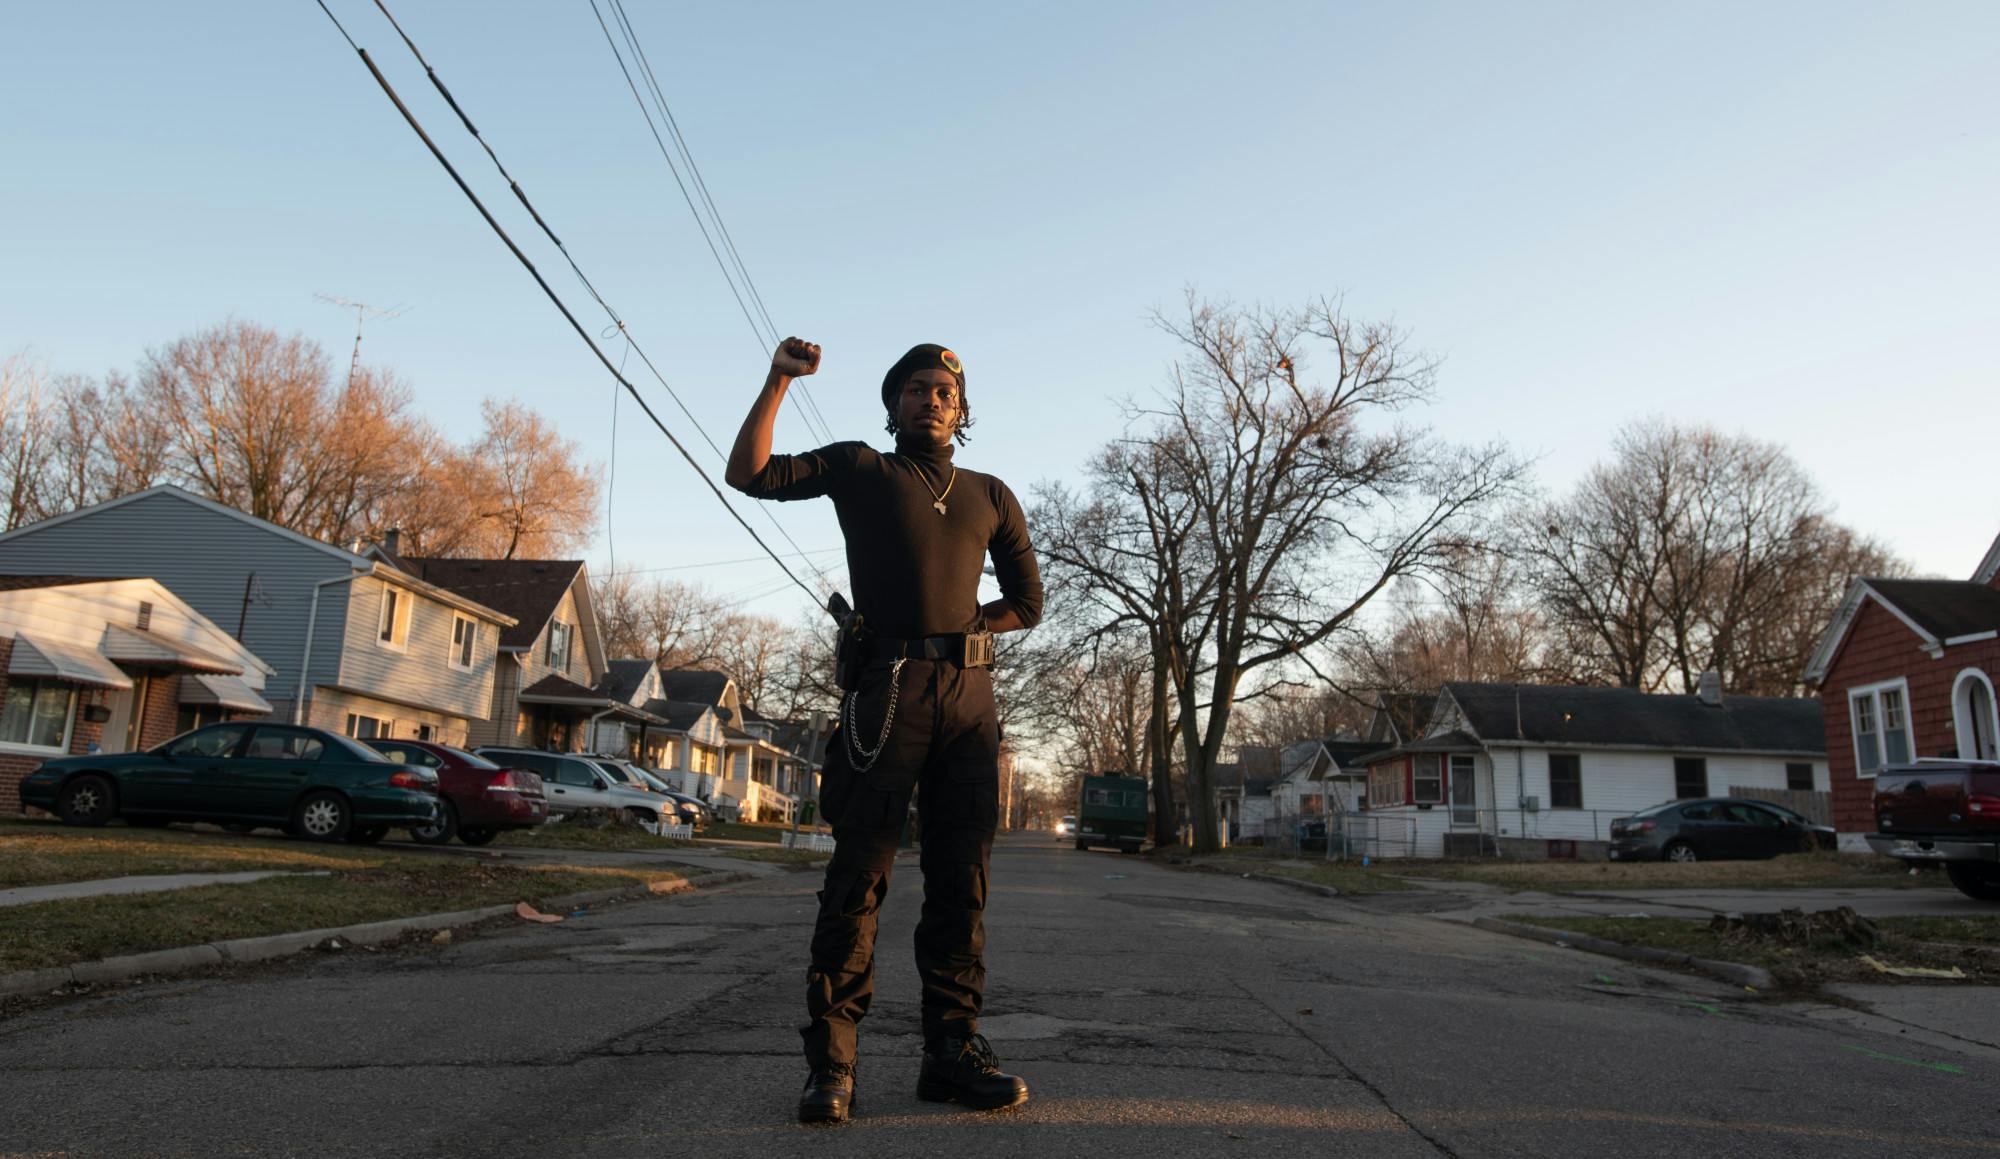 <p>James Henson stands with his right fist raised on Bensch Street in the predominantly Black neighborhood that he grew up in on March 11, 2021.</p>